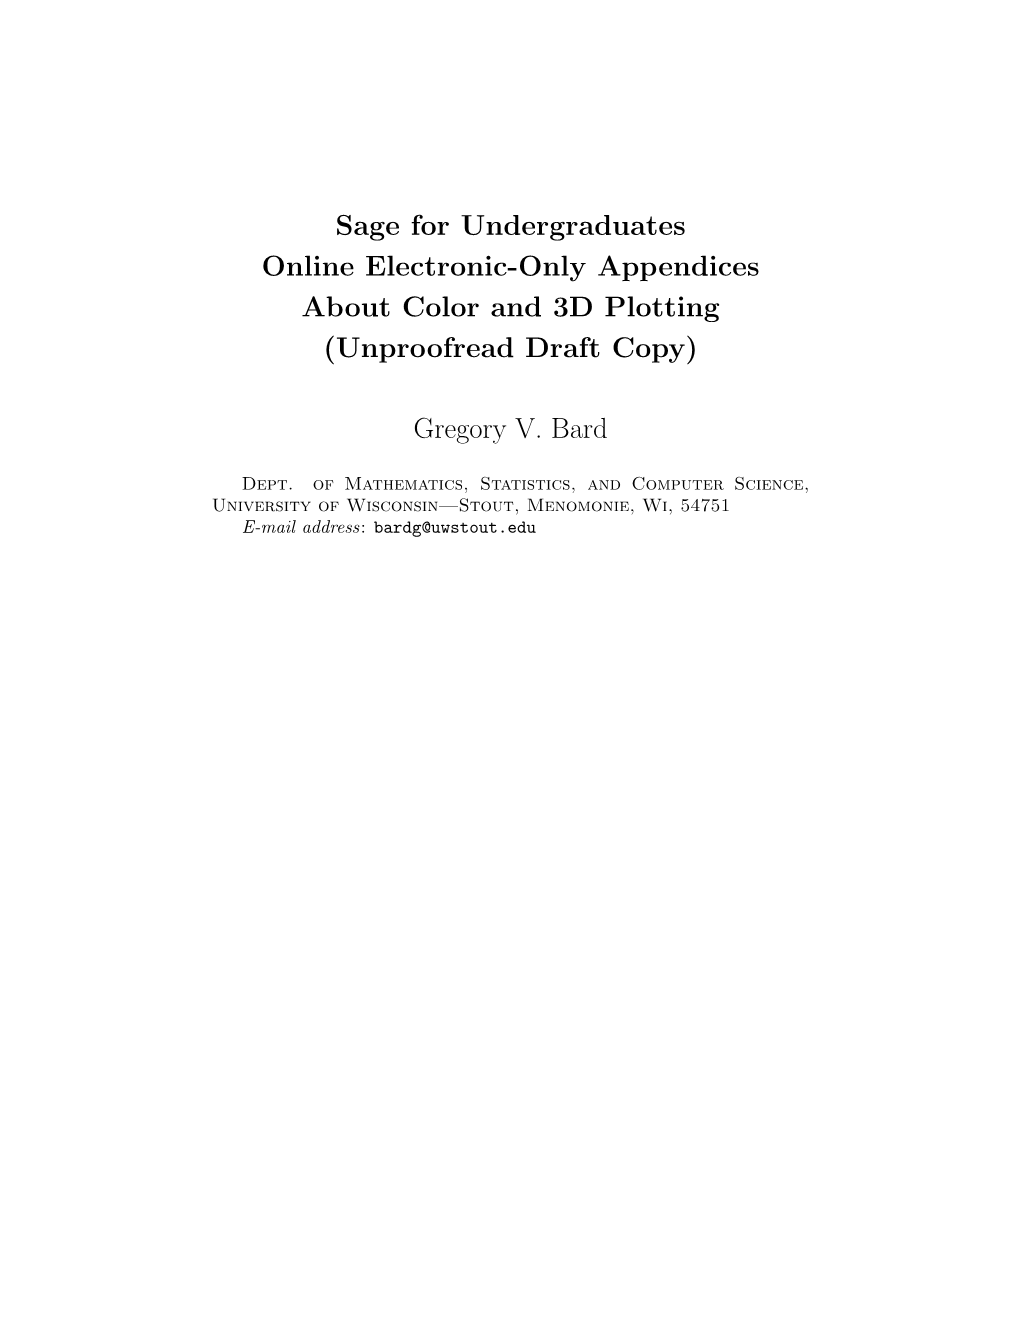 Sage for Undergraduates Online Electronic-Only Appendices About Color and 3D Plotting (Unproofread Draft Copy)